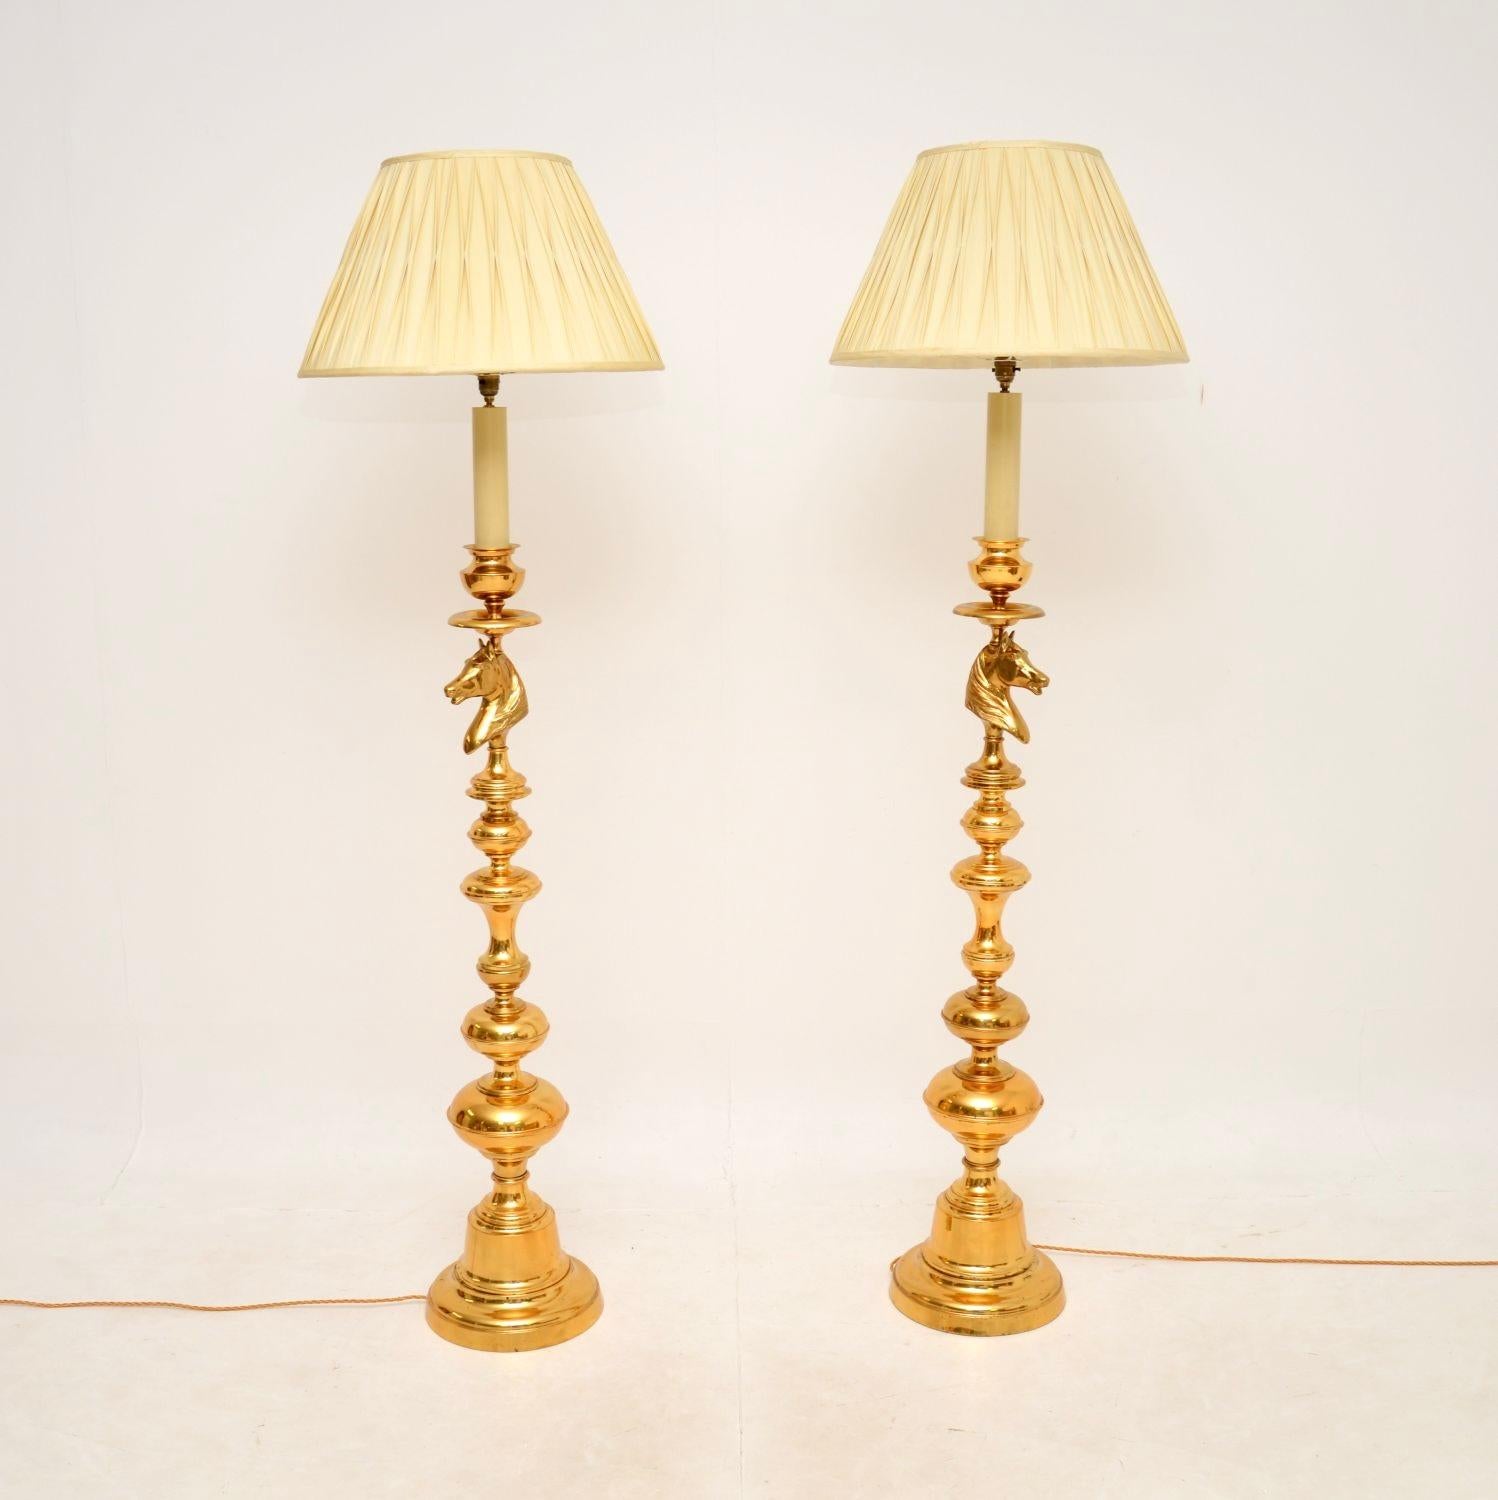 An absolutely stunning and incredibly well made pair of vintage Swedish brass floor lamps. They were recently imported from Sweden, and date from the 1970’s.

The quality is outstanding, they are extremely impressive, made from solid brass